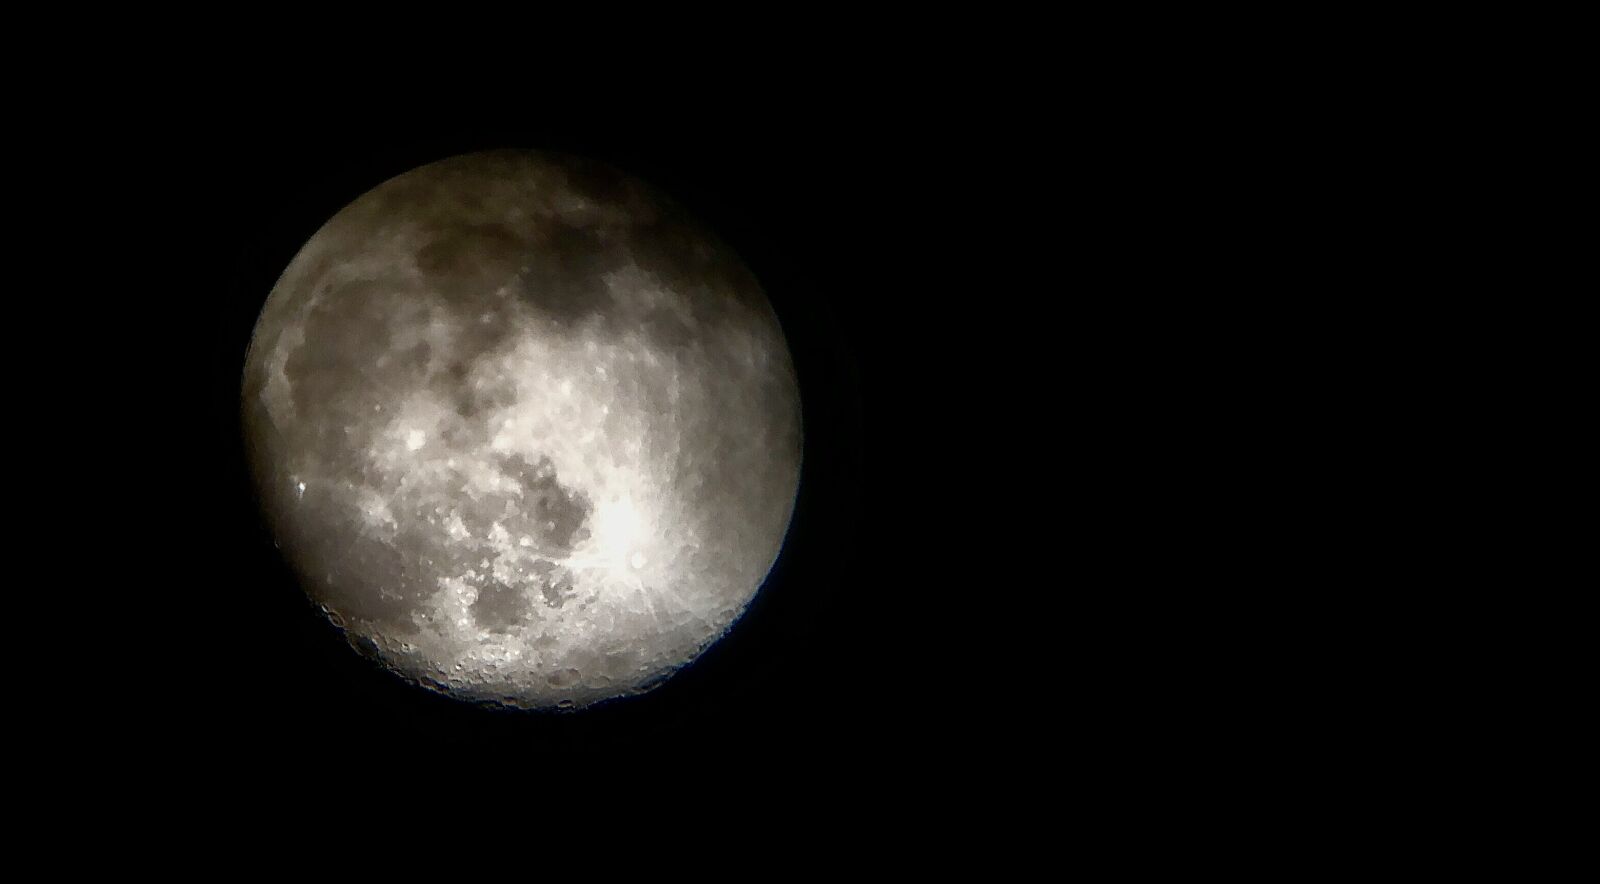 Apple iPhone X + iPhone X back dual camera 4mm f/1.8 sample photo. Moon, space, universe photography